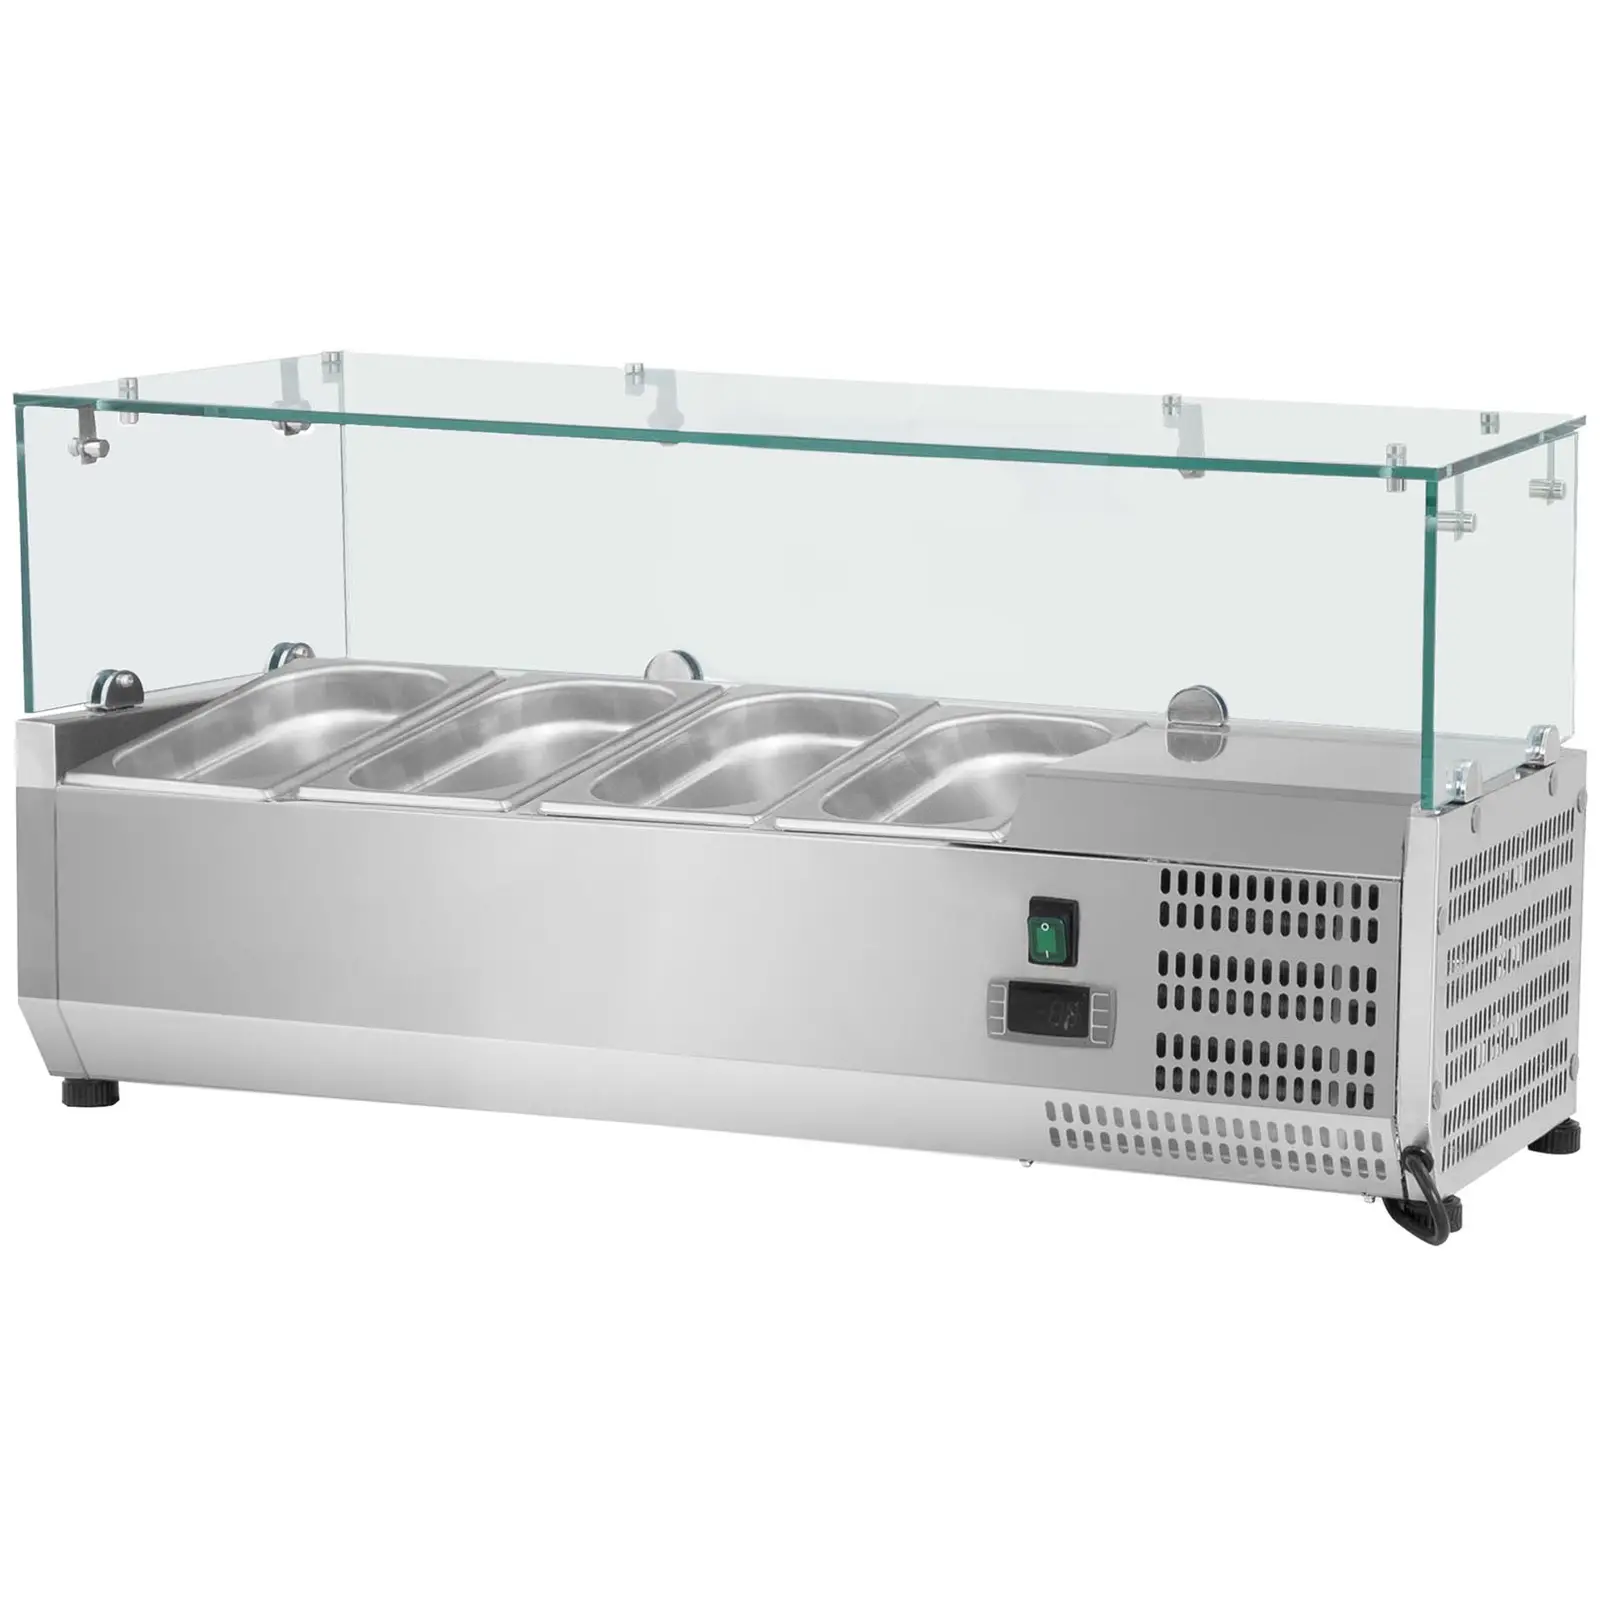 Countertop Refrigerated Display Case - 120 x 39 cm - Glass Cover